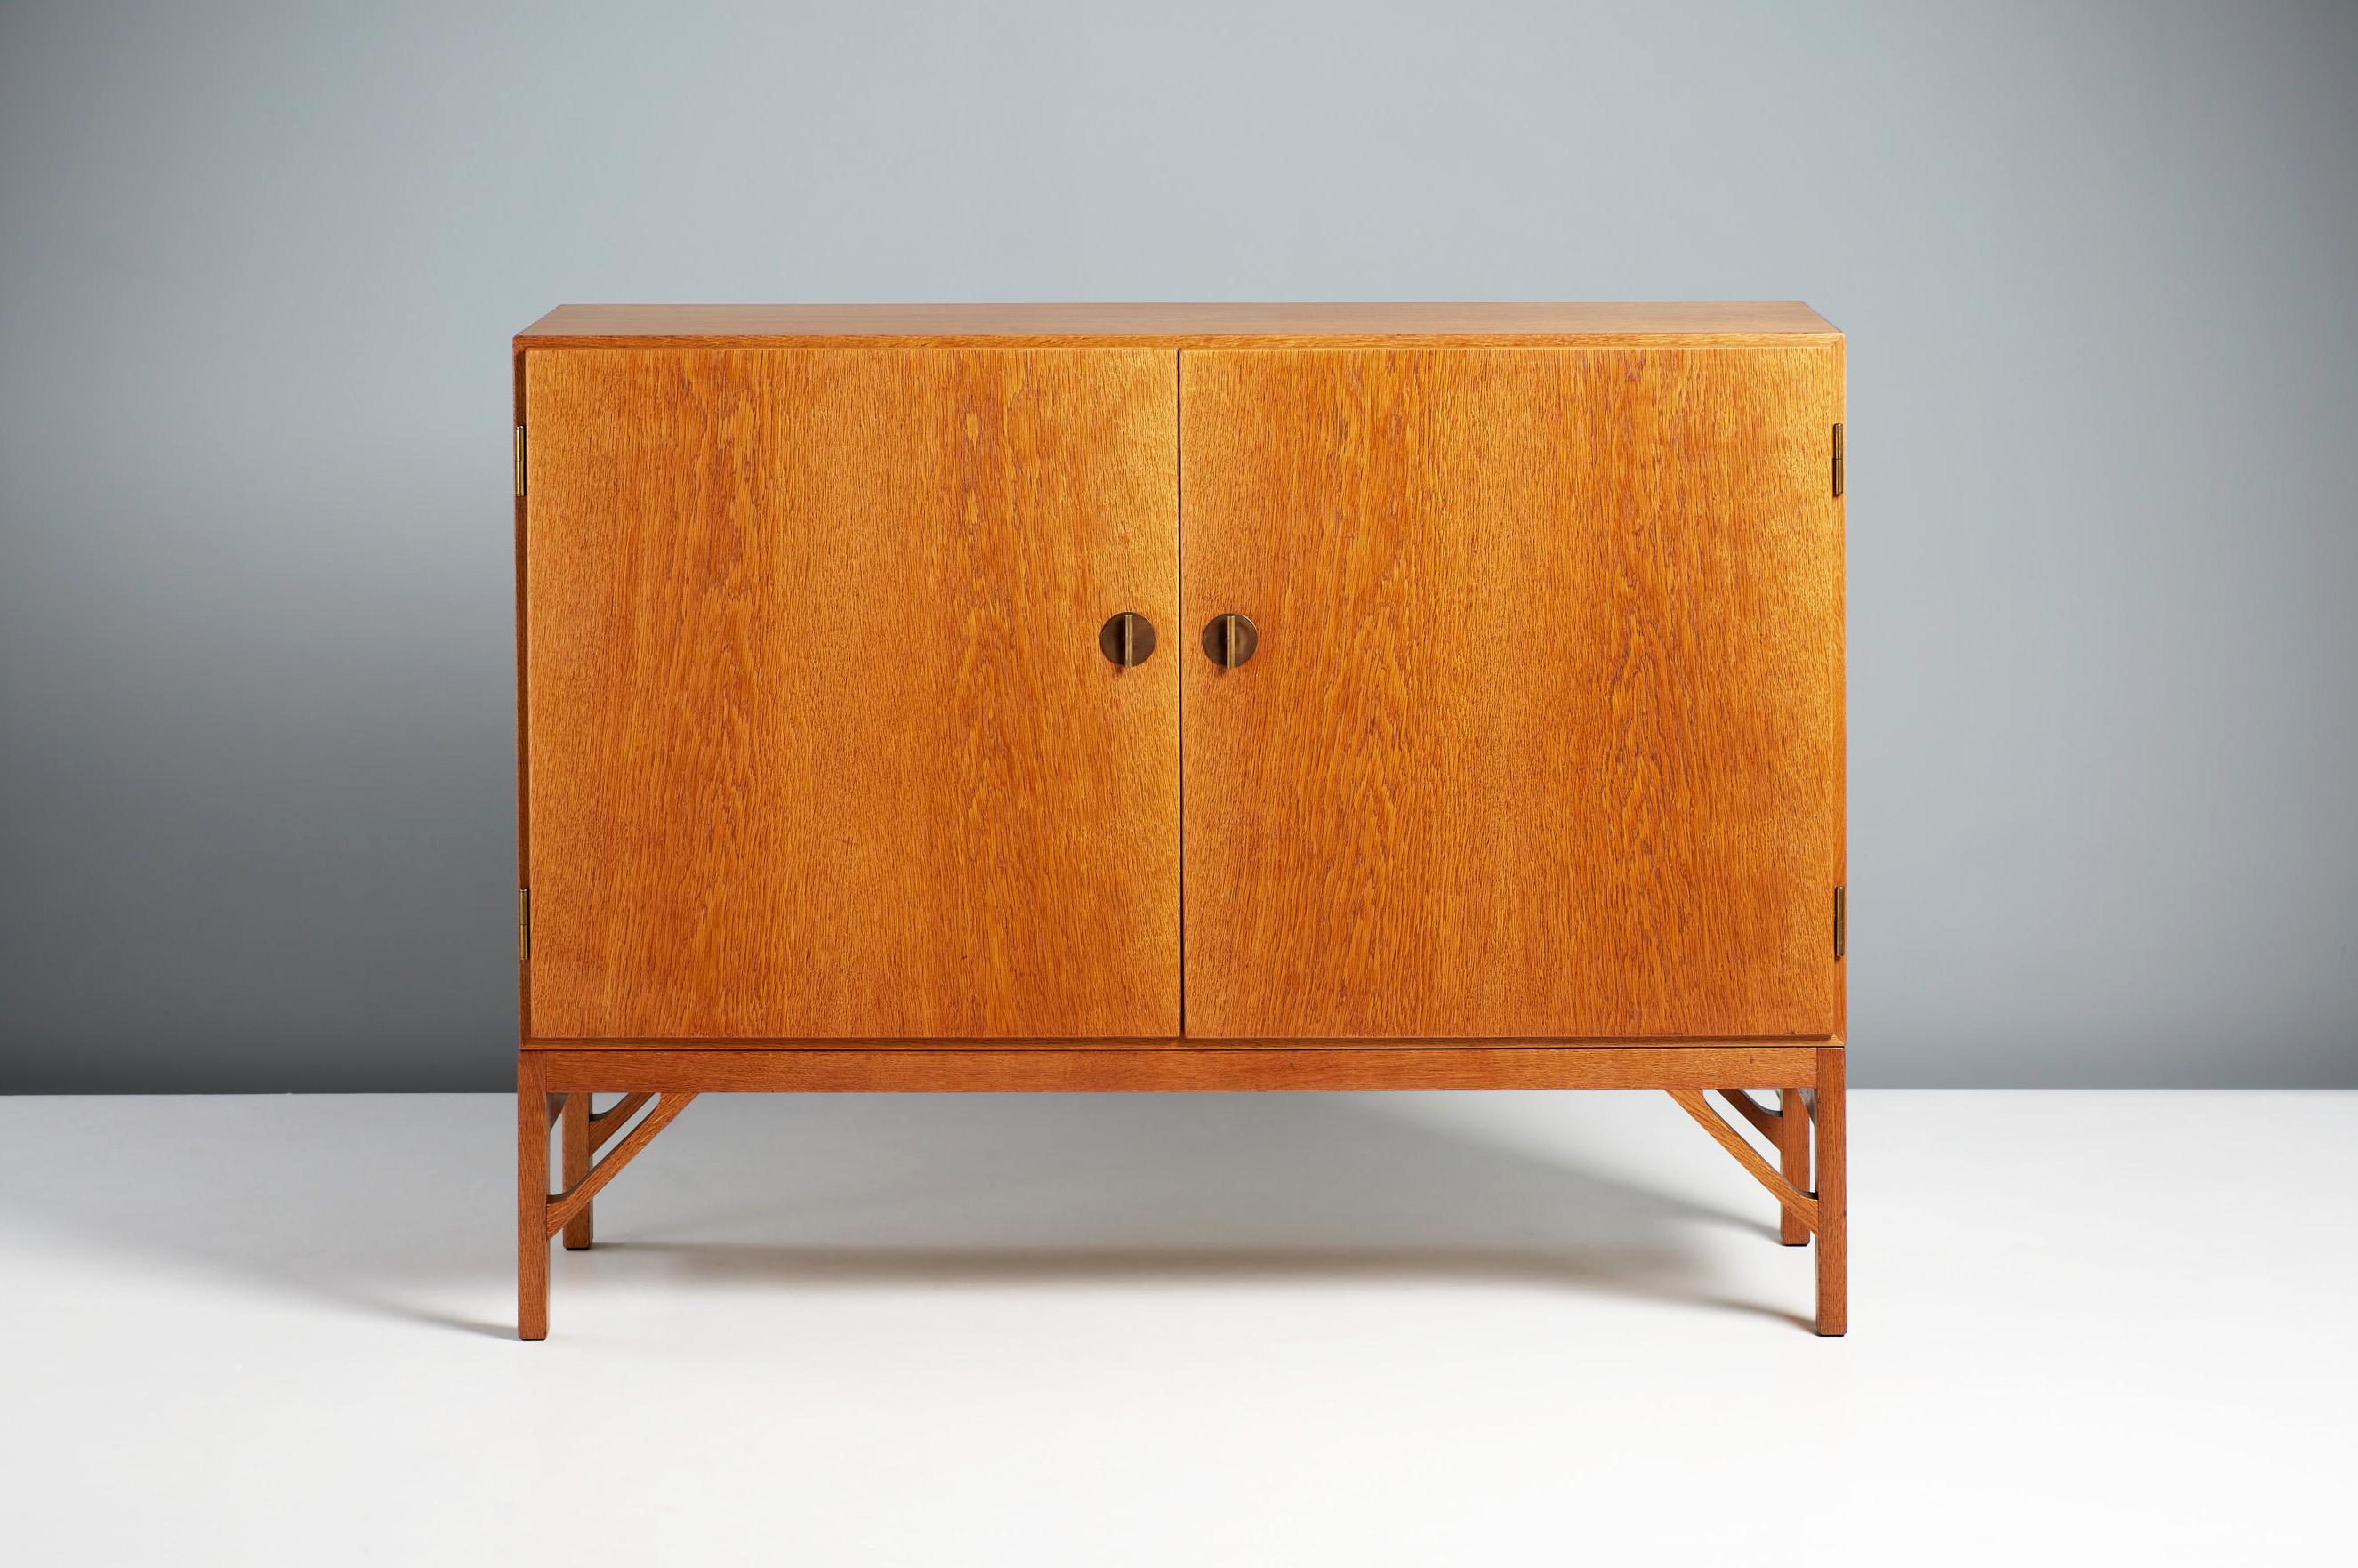 Borge Mogensen - Model A 232 Cabinet.

Mogensen's iconic cabinet design: The front has two doors with Chinese style decorative brass T-Bar keys. The interior is lined with Maple wood veneer and solid maple shelves and trays. Superb condition and